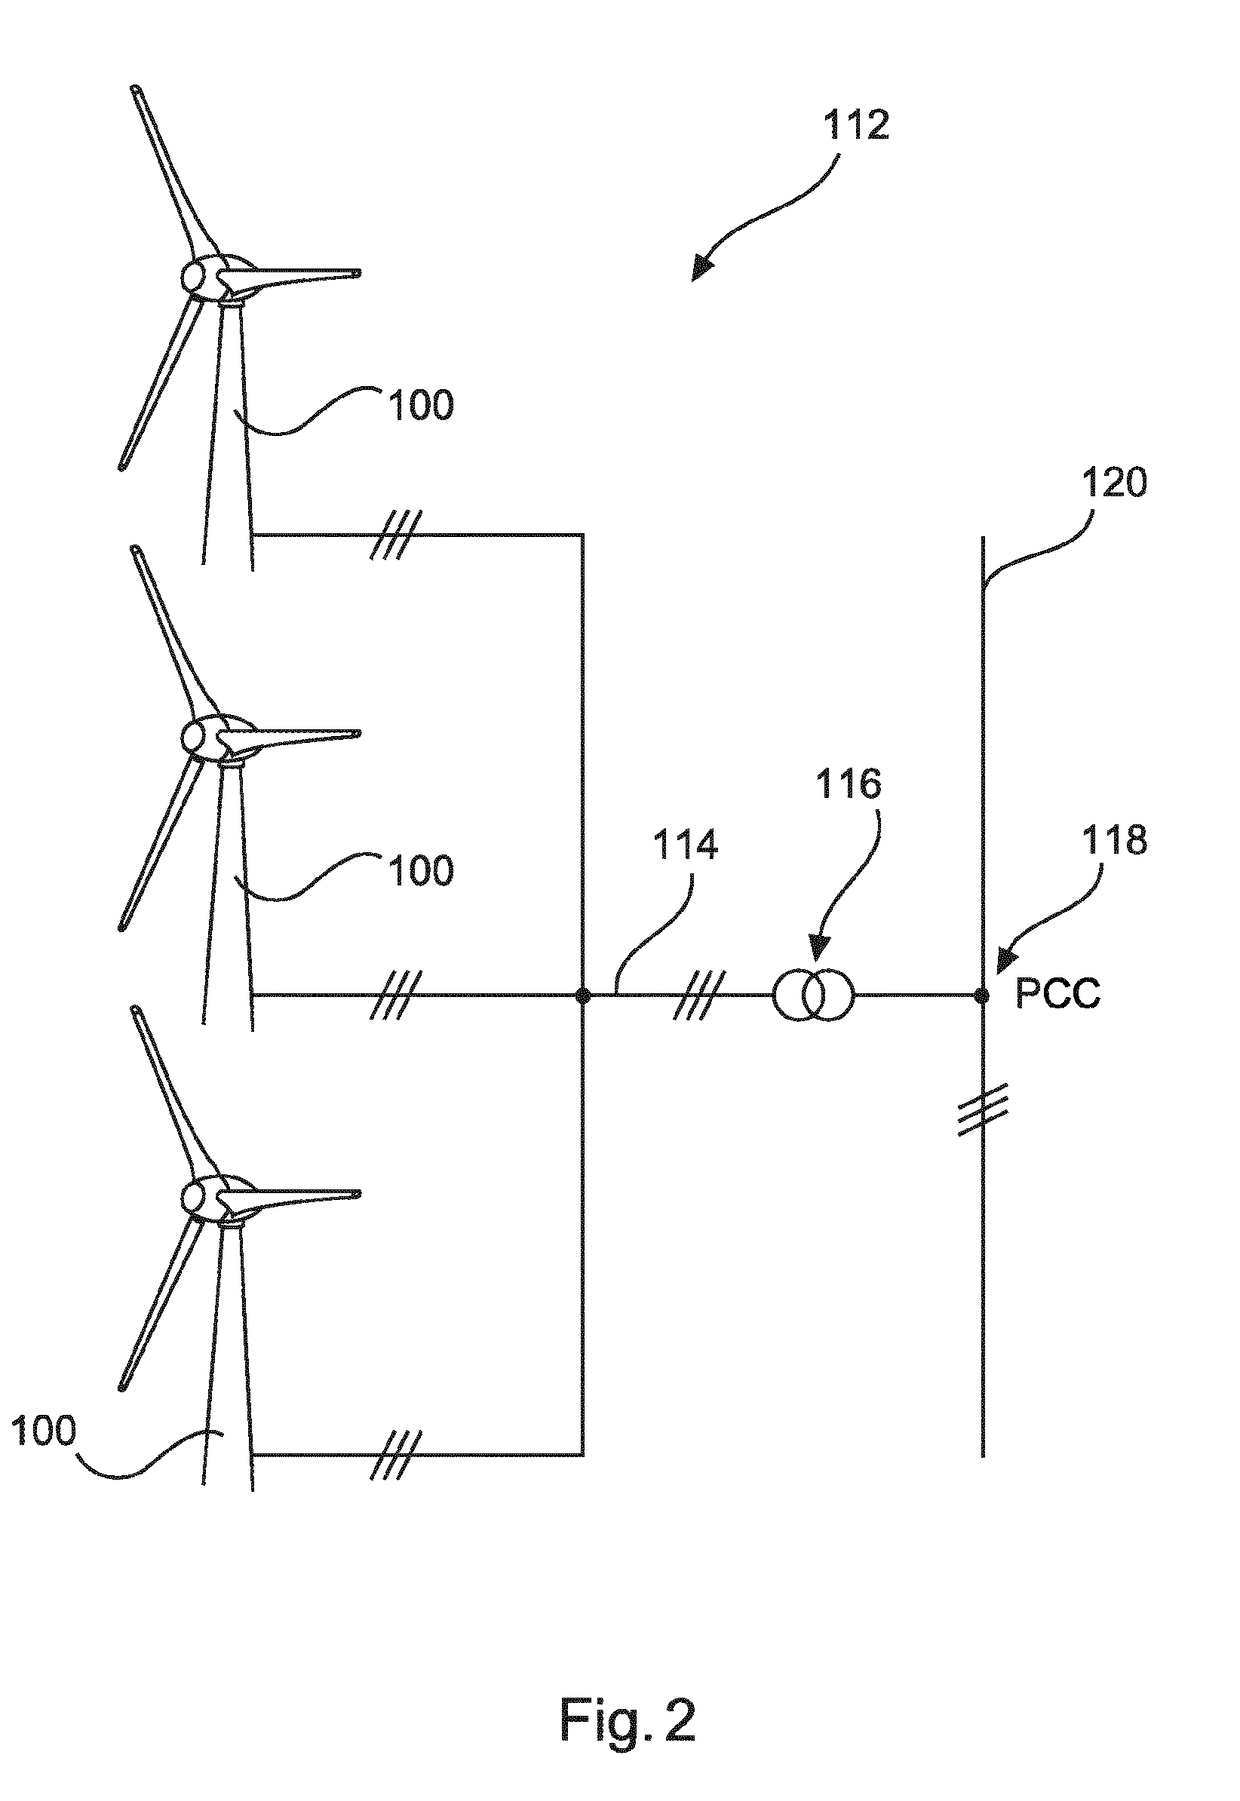 Method for feeding electrical power into an electric supply network